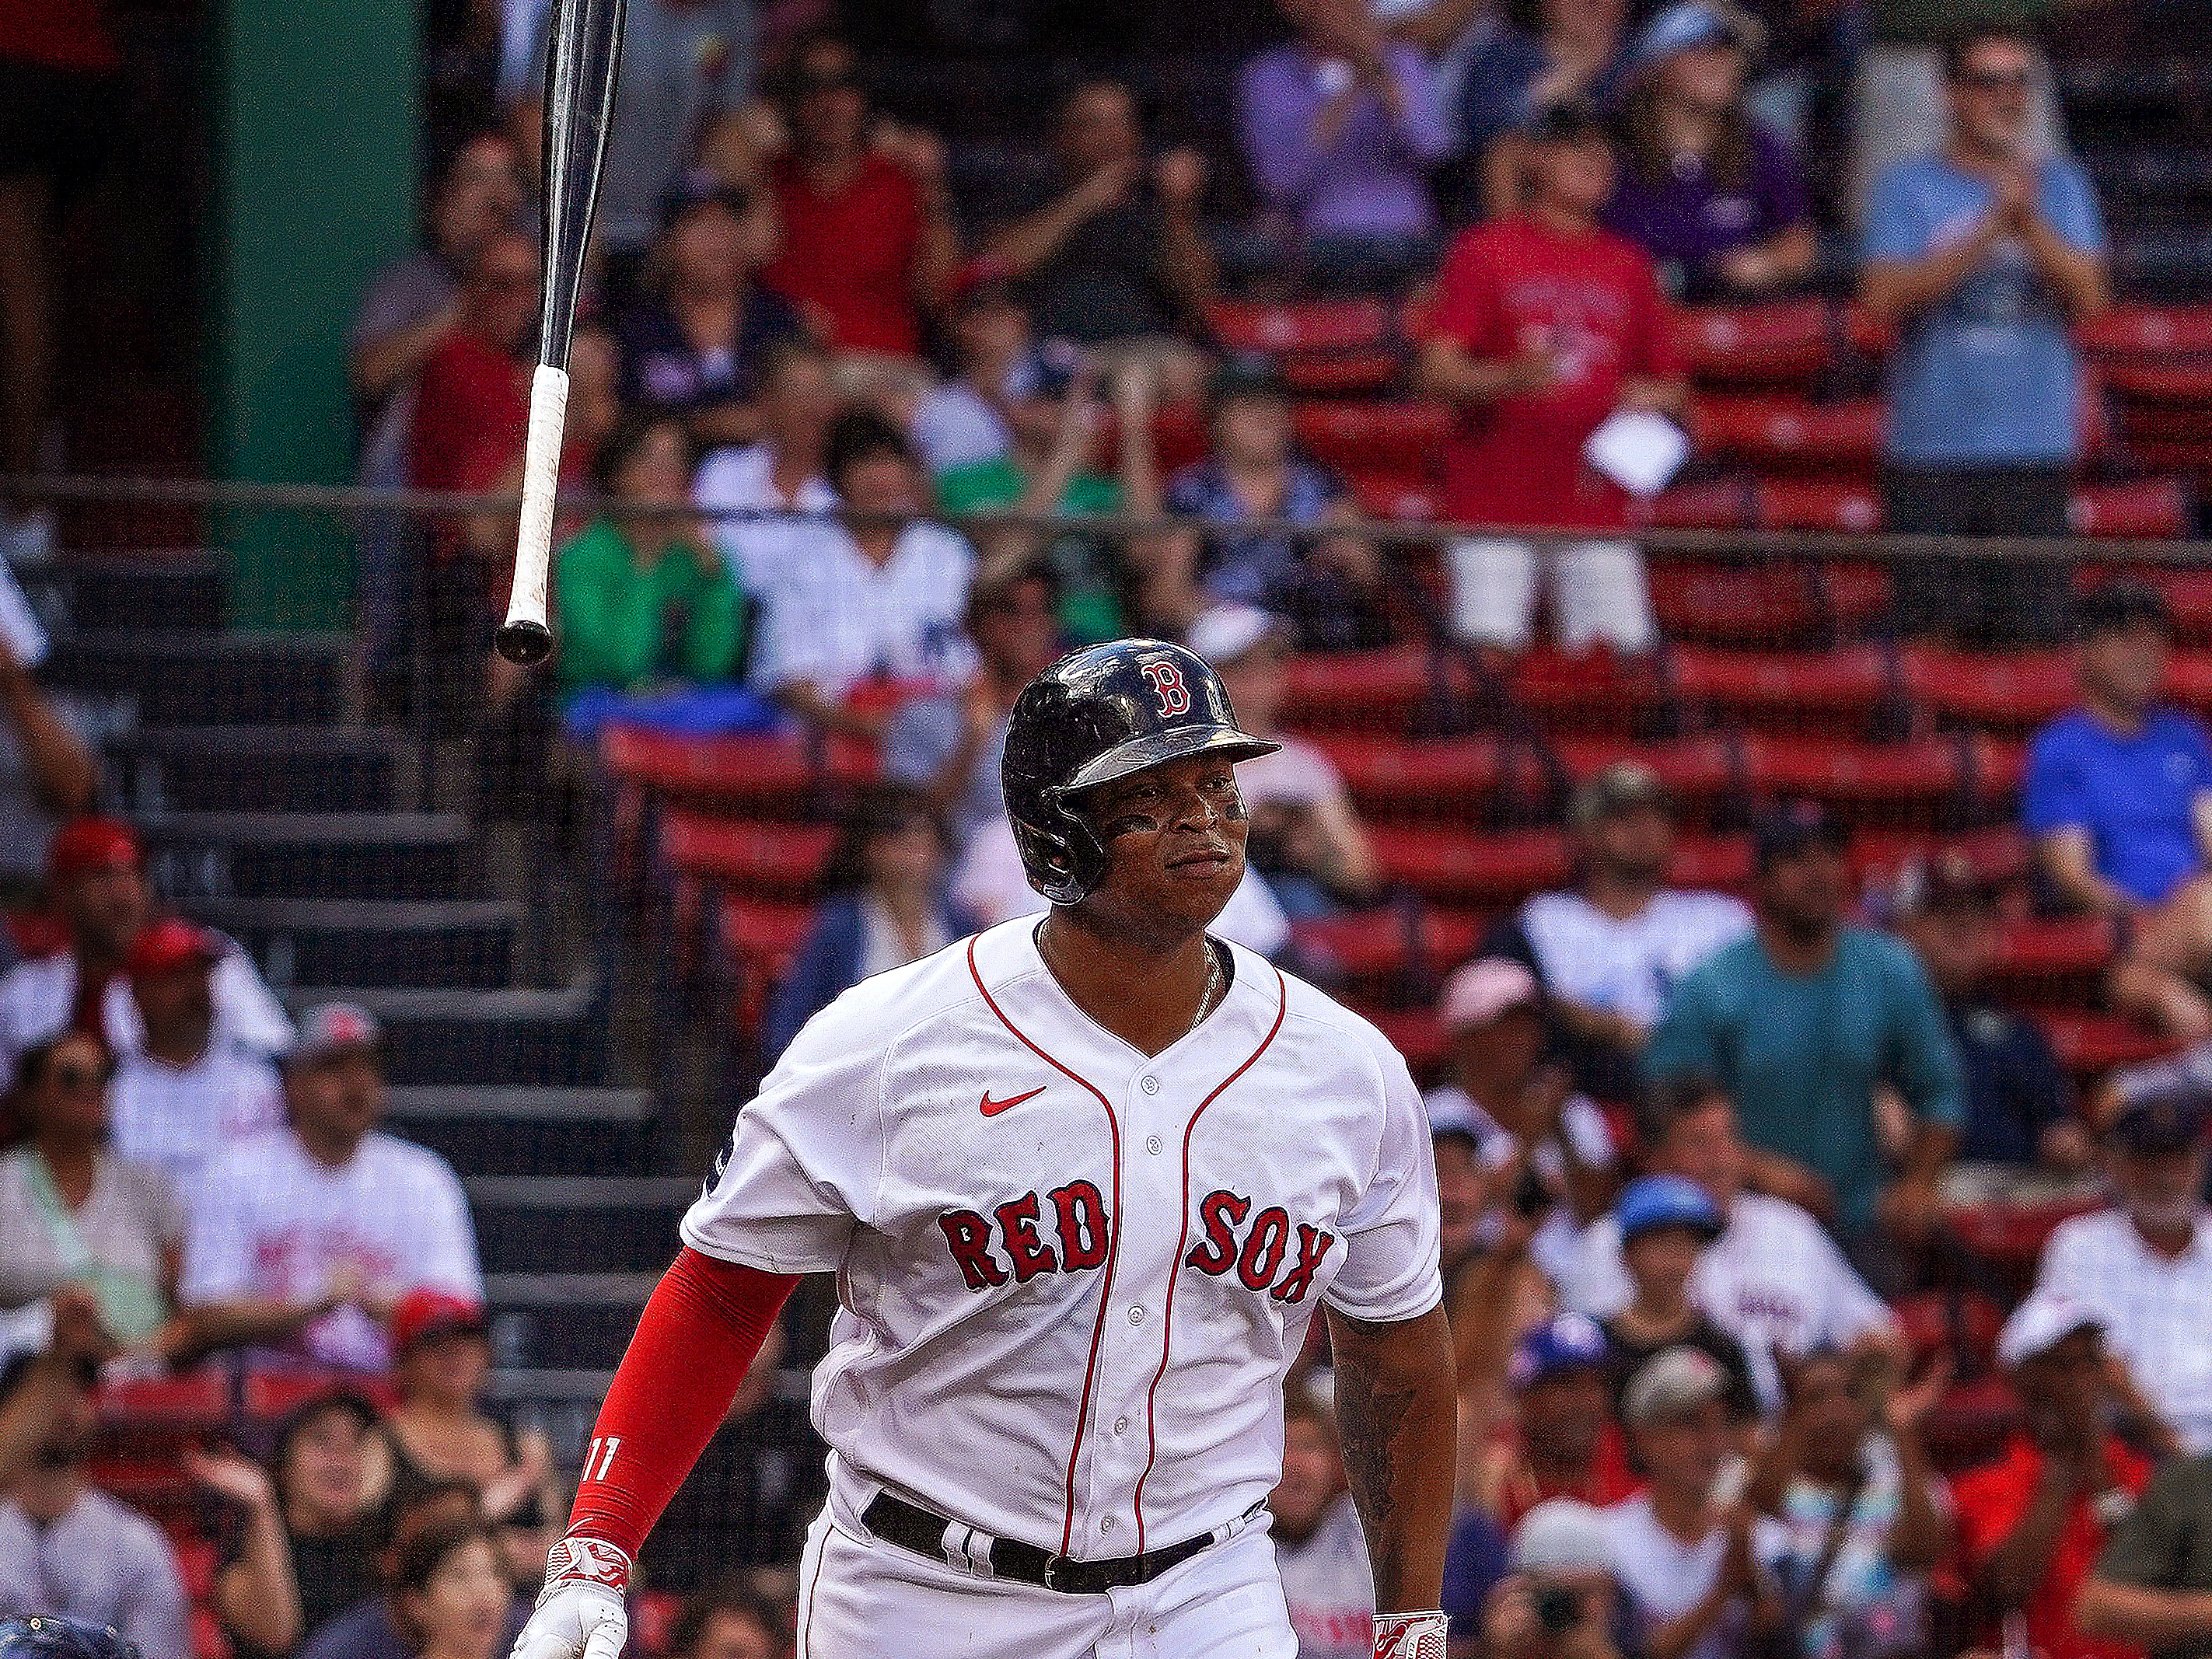 Frustration bubbling as Rafael Devers tries to chase his way out of a slump  - The Boston Globe